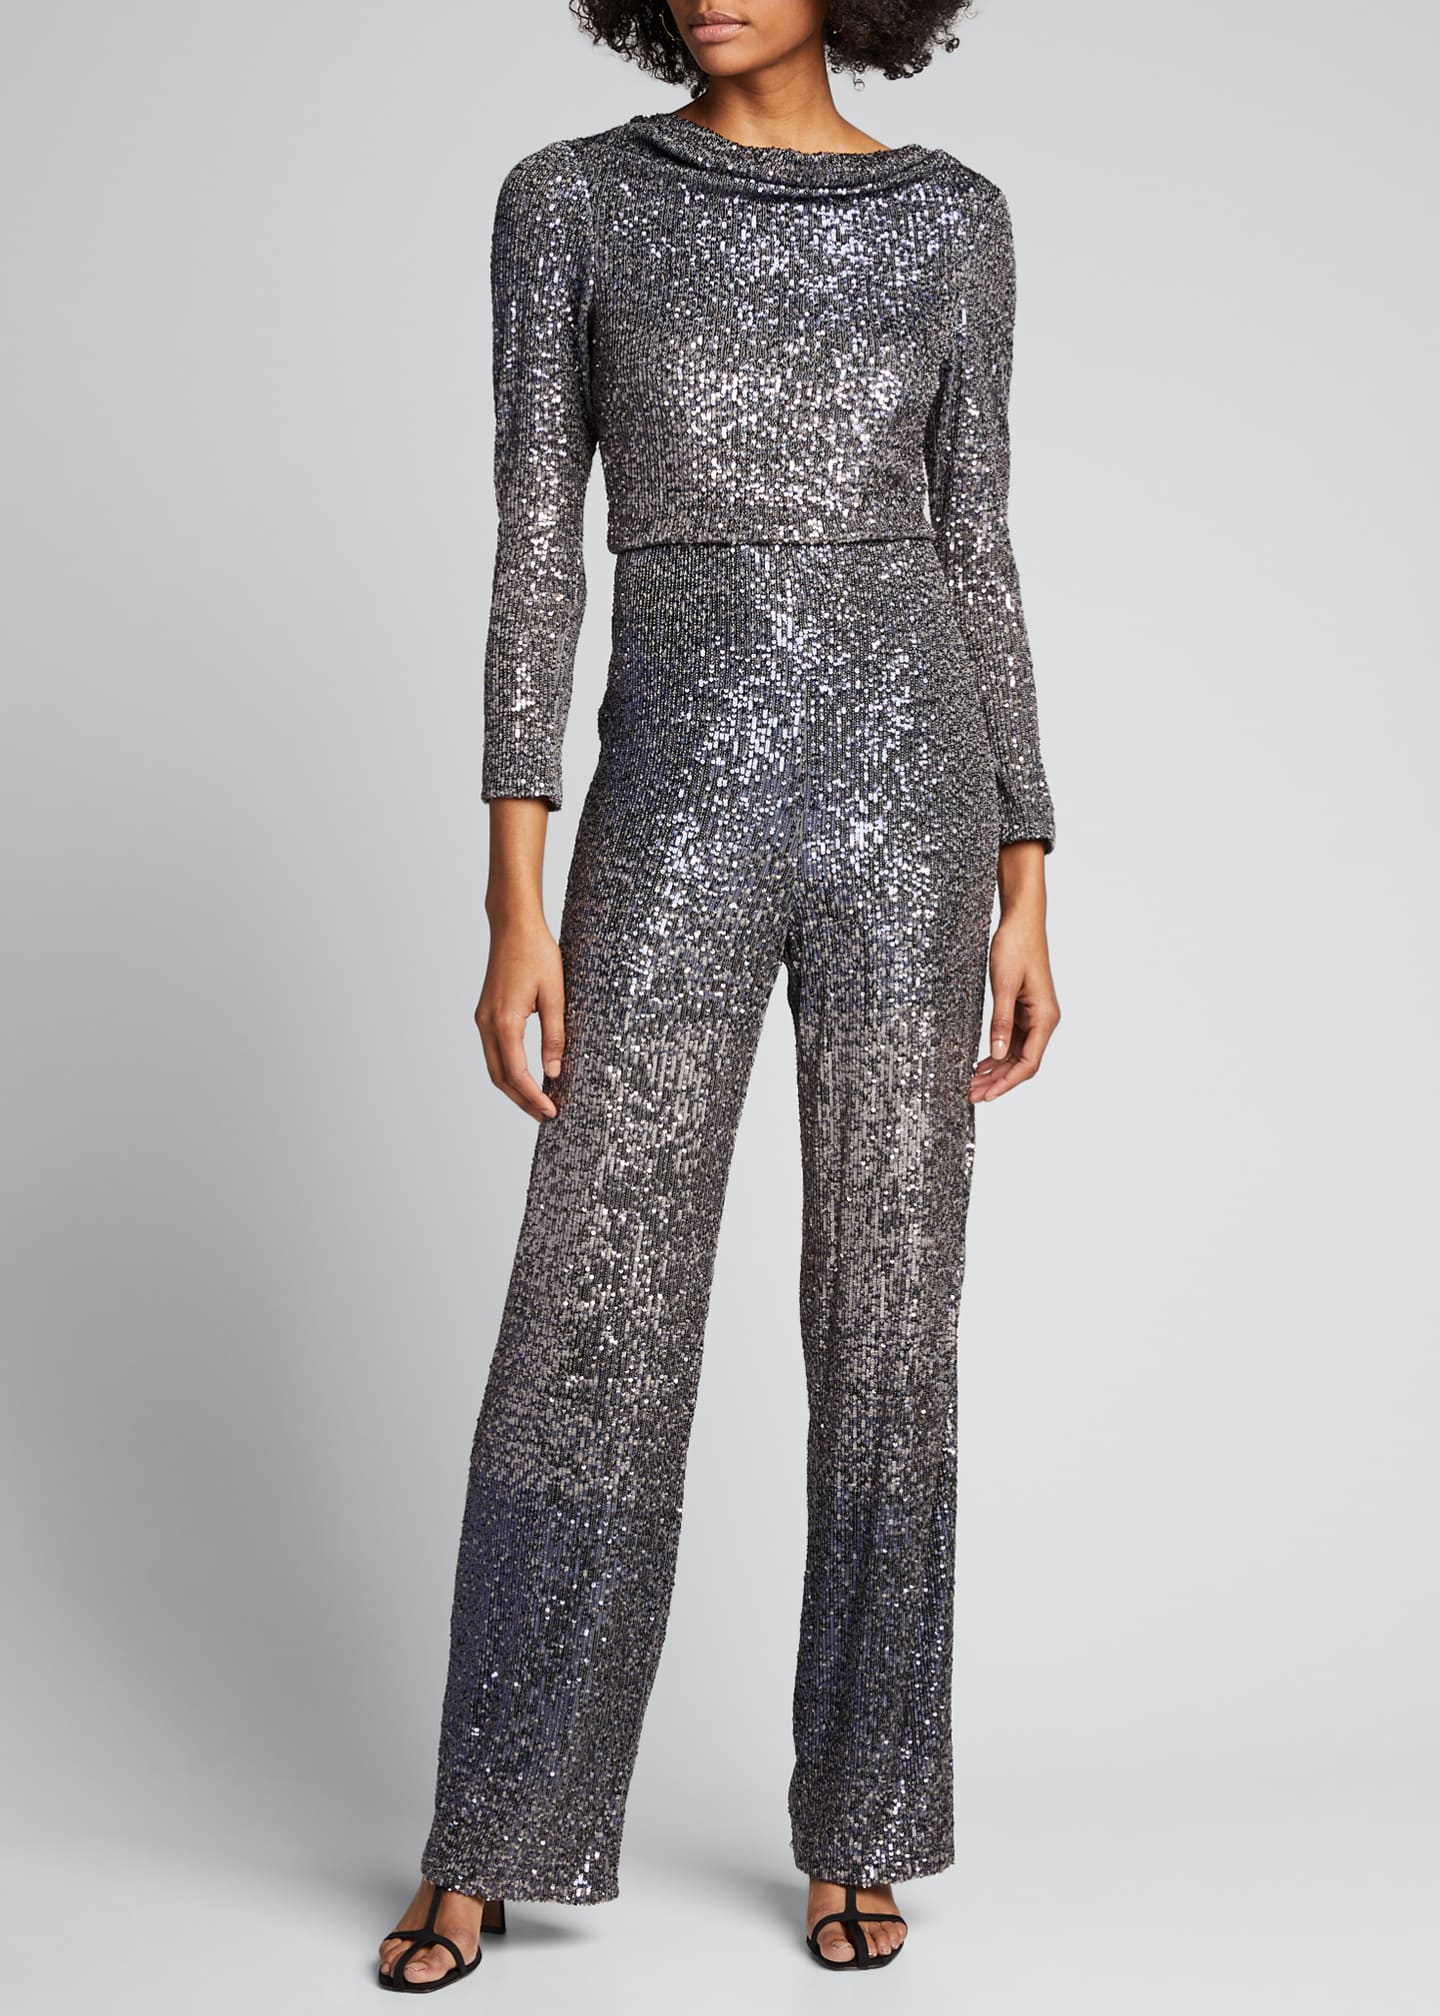 Badgley Mischka Collection Ombre Sequin Cowl-Neck Long-Sleeve Jumpsuit ...